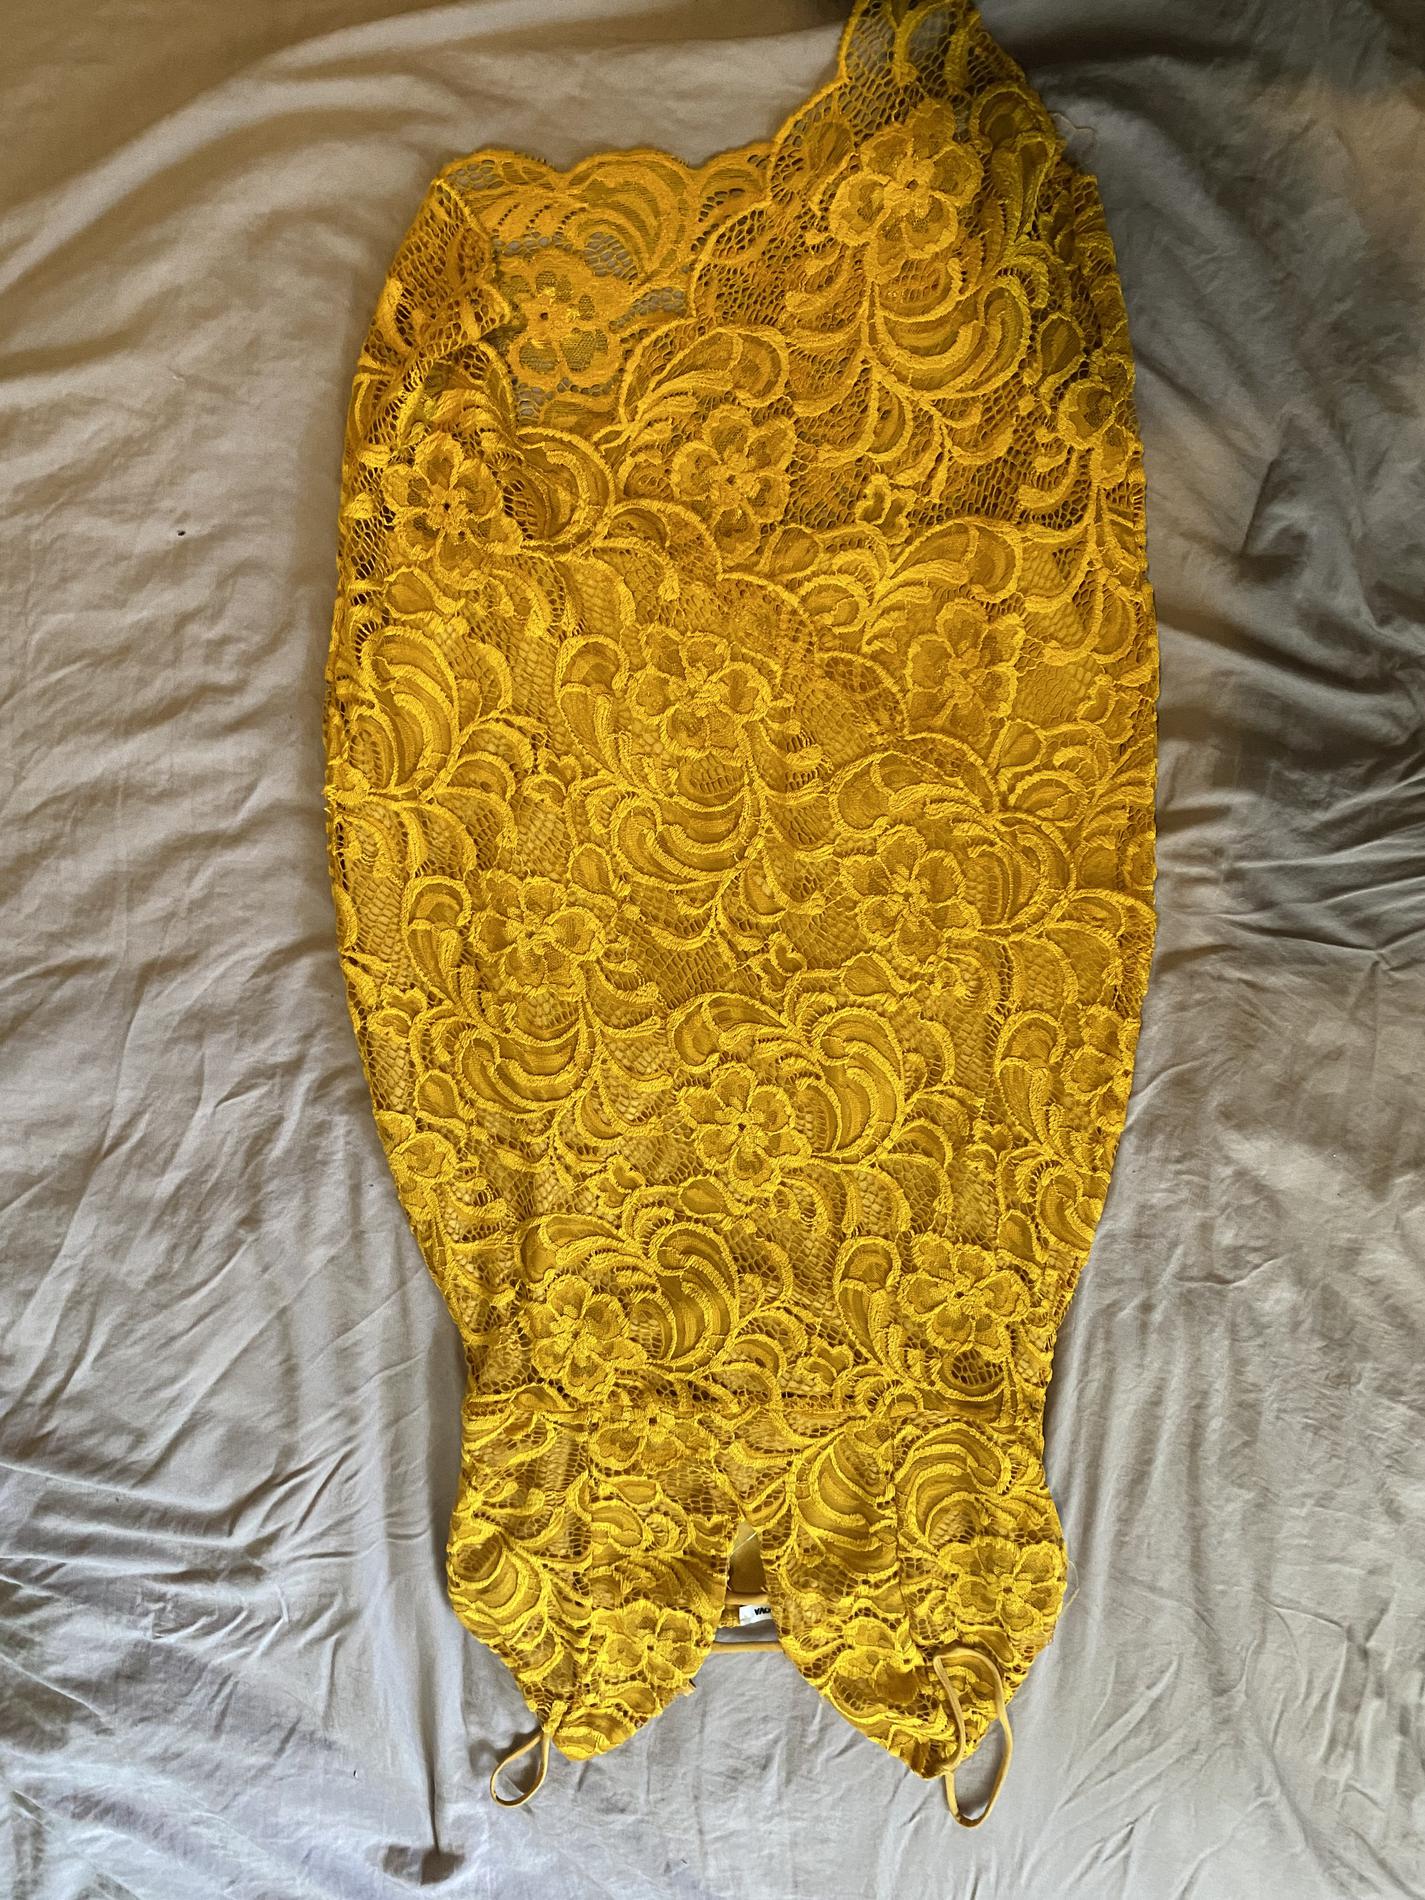 Yellow Size 12 Cocktail Dress on Queenly